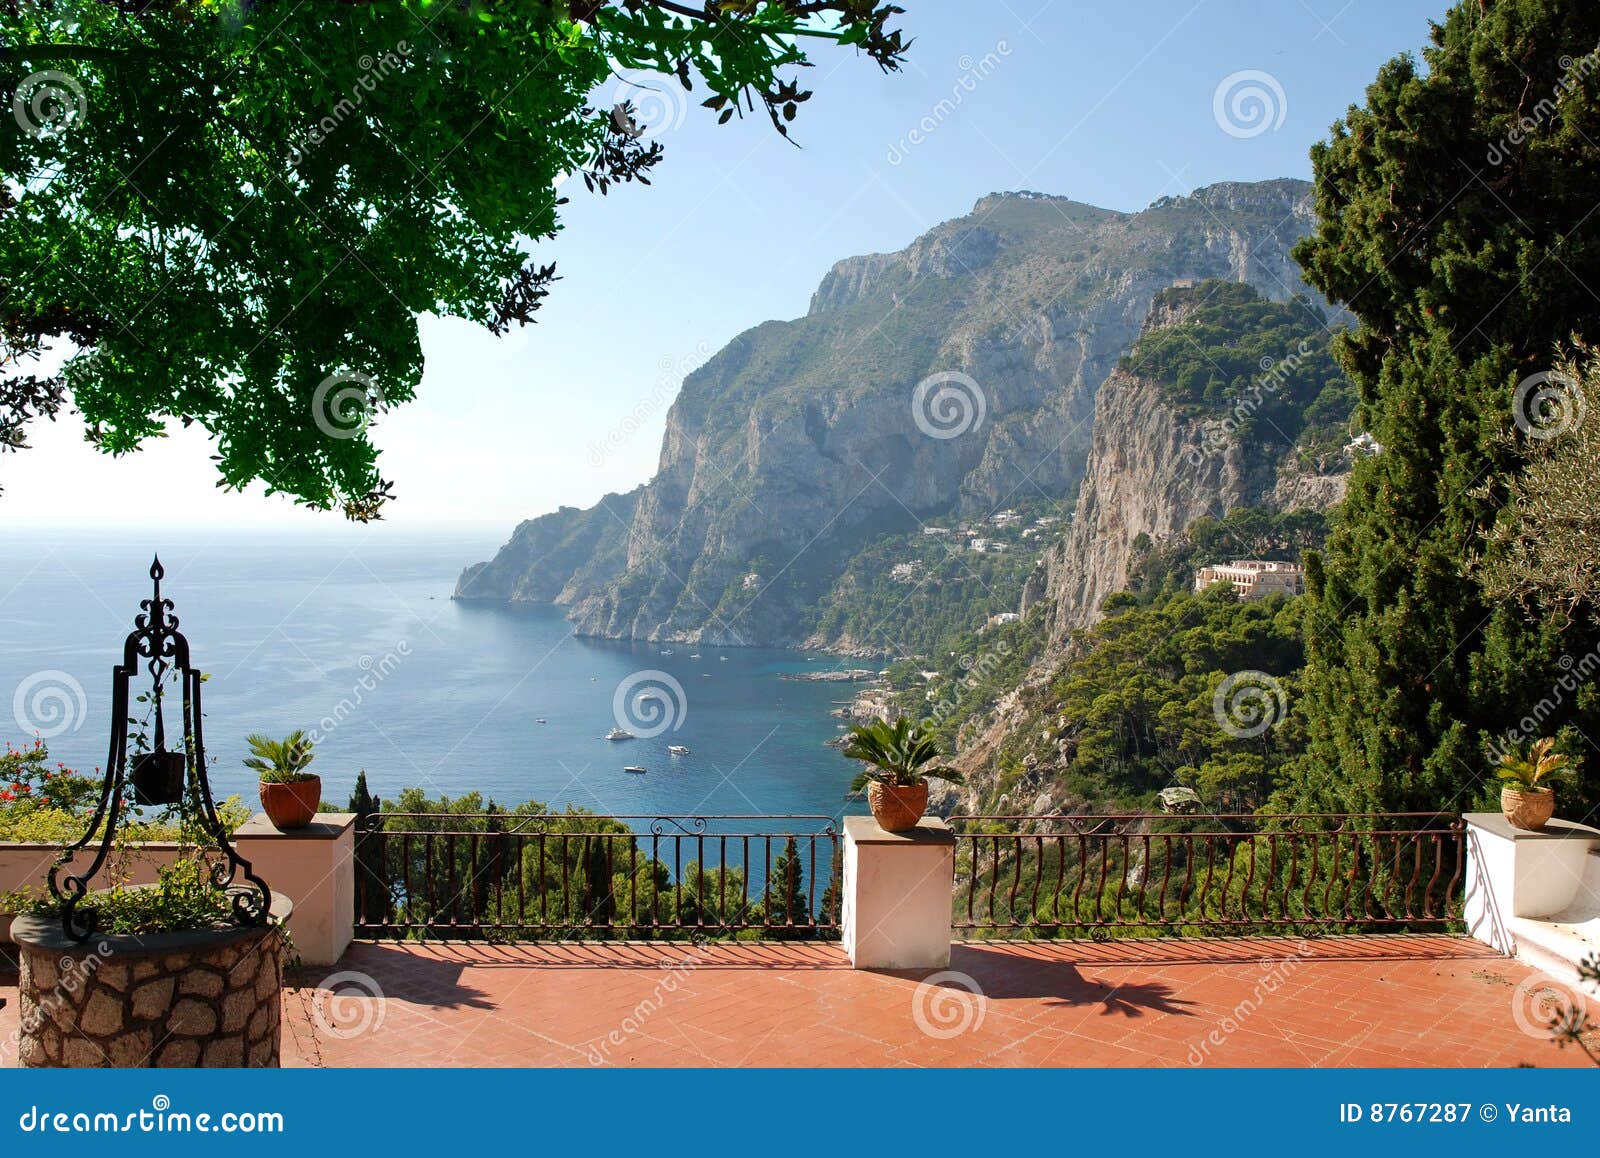 view from the terrace of luxury villa